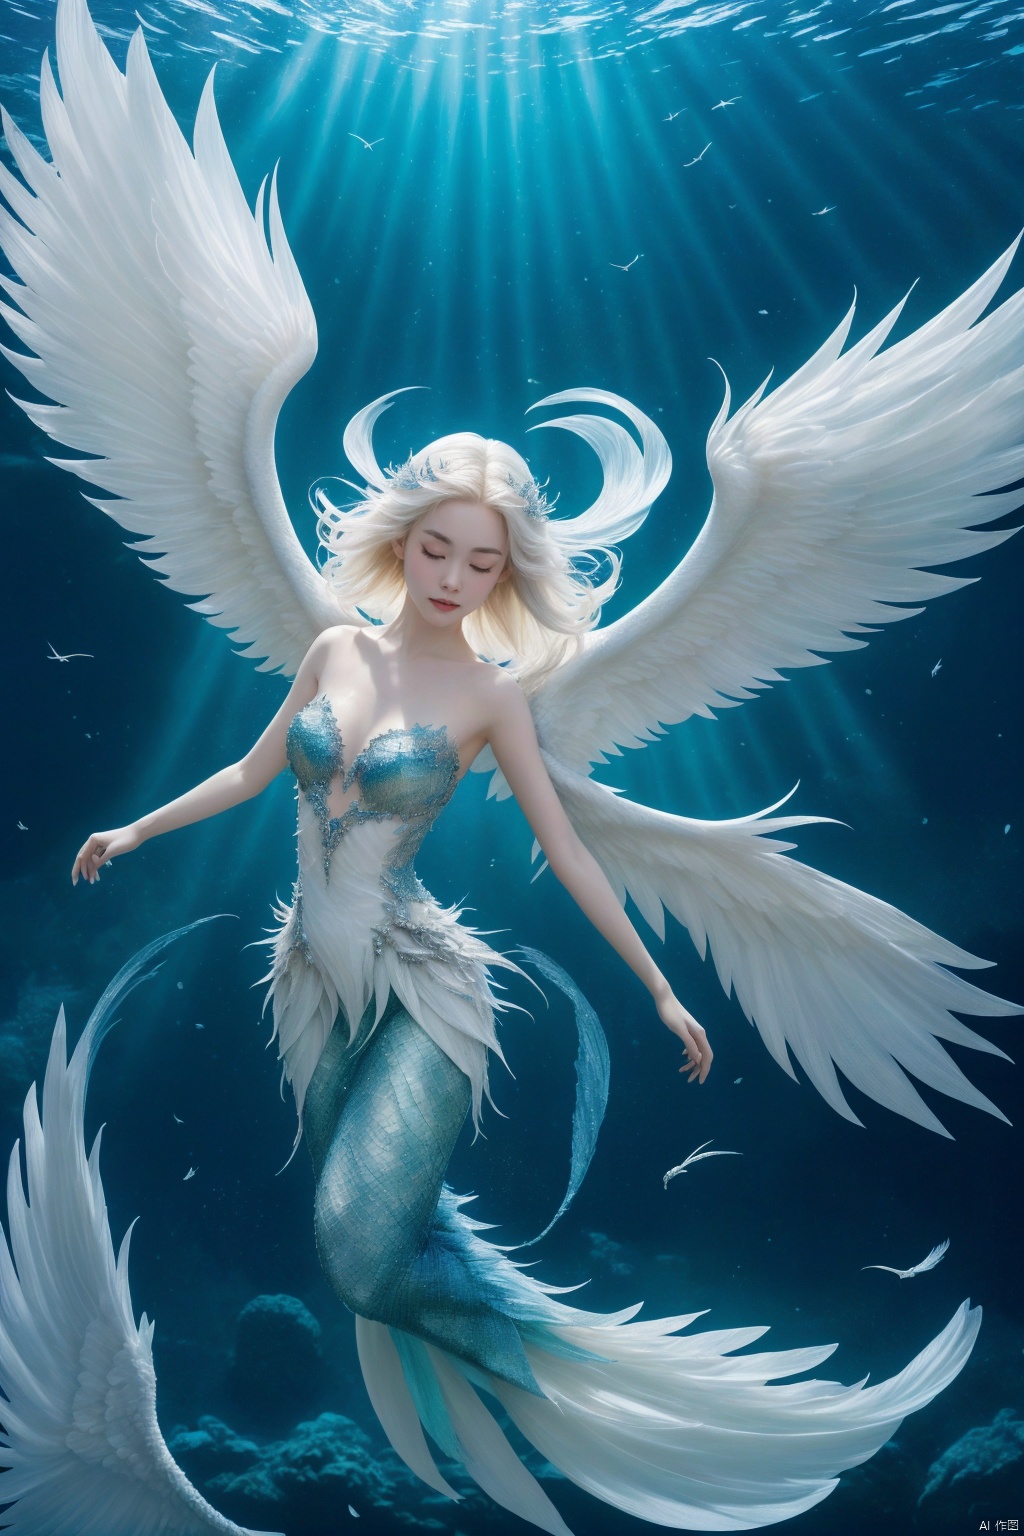 Create a striking image that showcases the wings of an archangel in an anime style. The depicted character is a floating female figure, creating a strong emotional power and presenting as a female demon like character. With the help of the halo of saints, she is engulfed by a mysterious fusion, and her entire body is depicted as composed of white feathers. This CGI rendering should evoke a tense relationship between calmness and turbulence, evoking a sense of "rest".